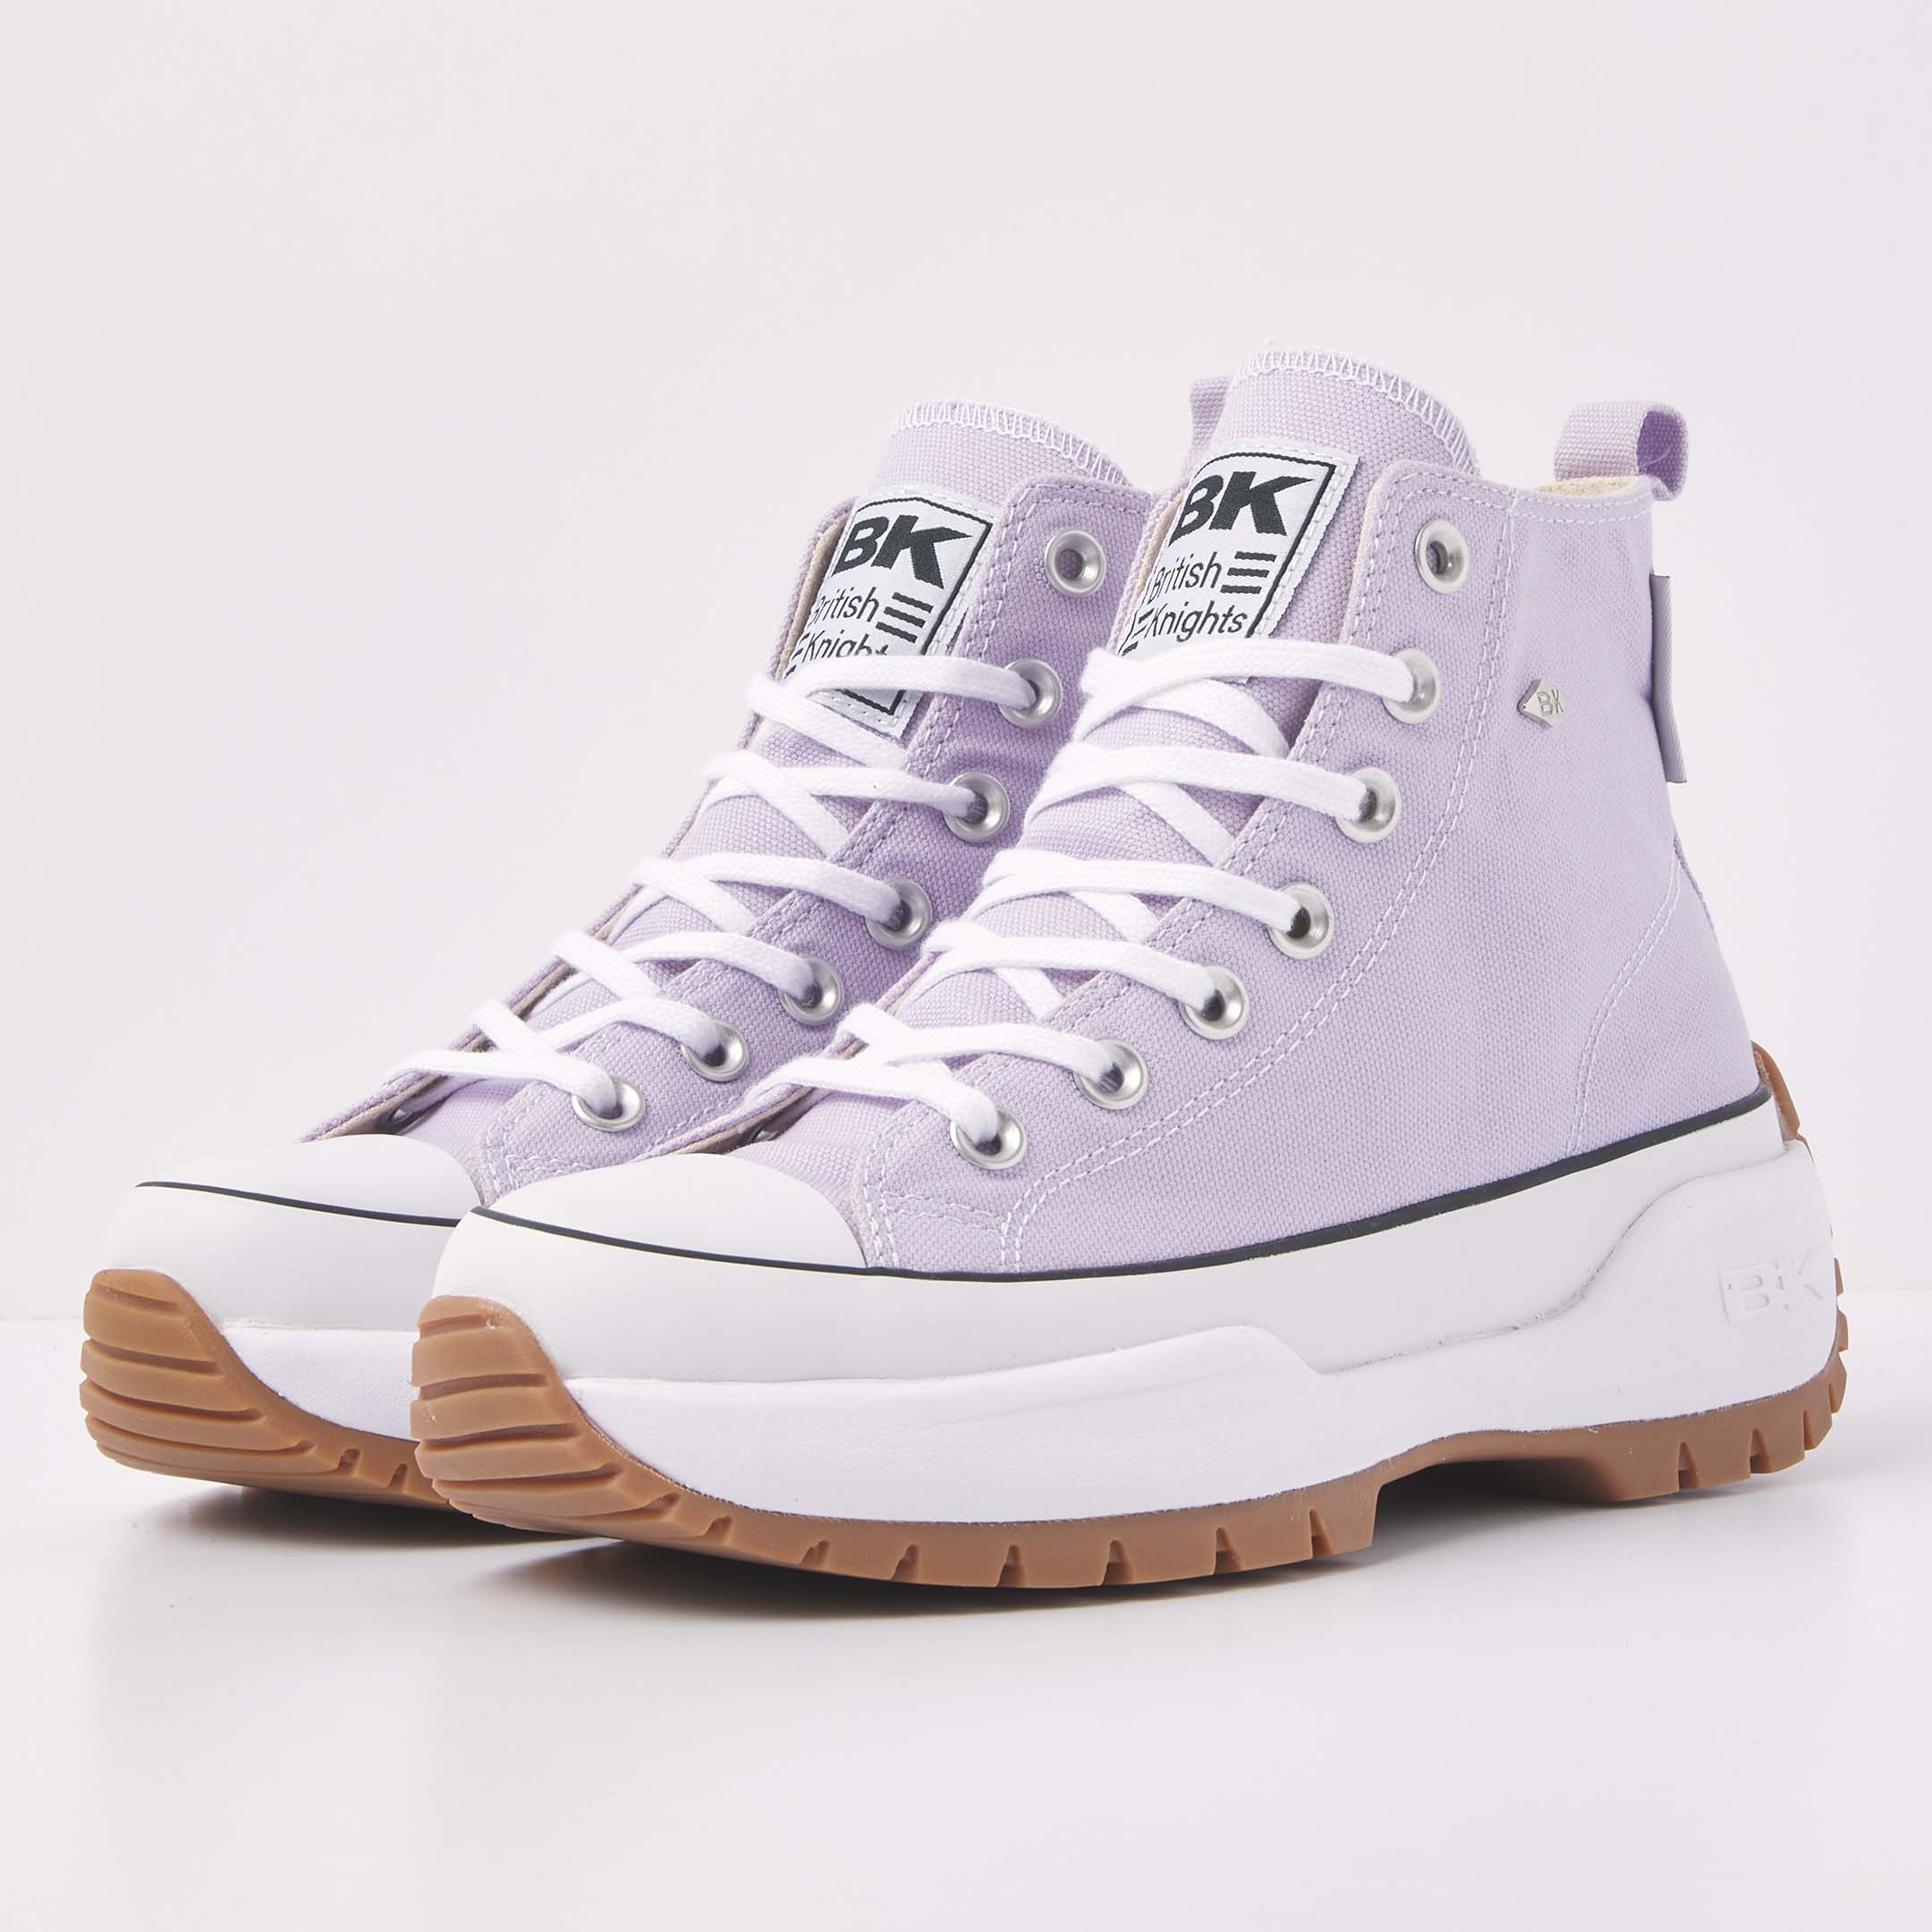 British Knights Sneaker Front view  B51-3710-04 KAYA MID FLY HIGH-TOP FEMALE